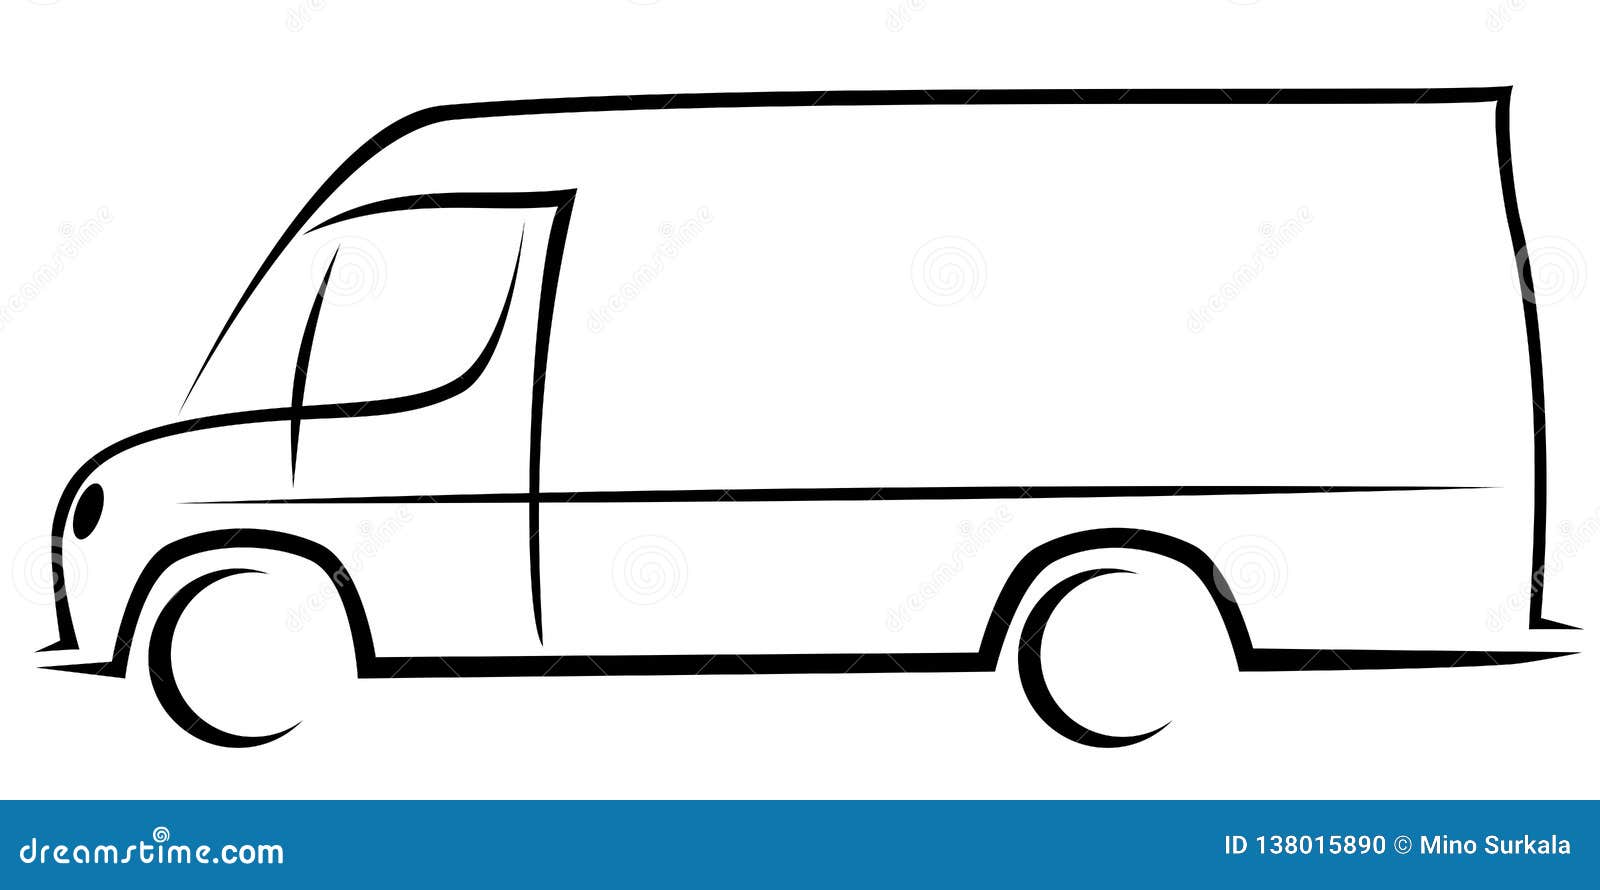 Dynamic Vector Illustration of a Delivery Van with a Body Typical for ...